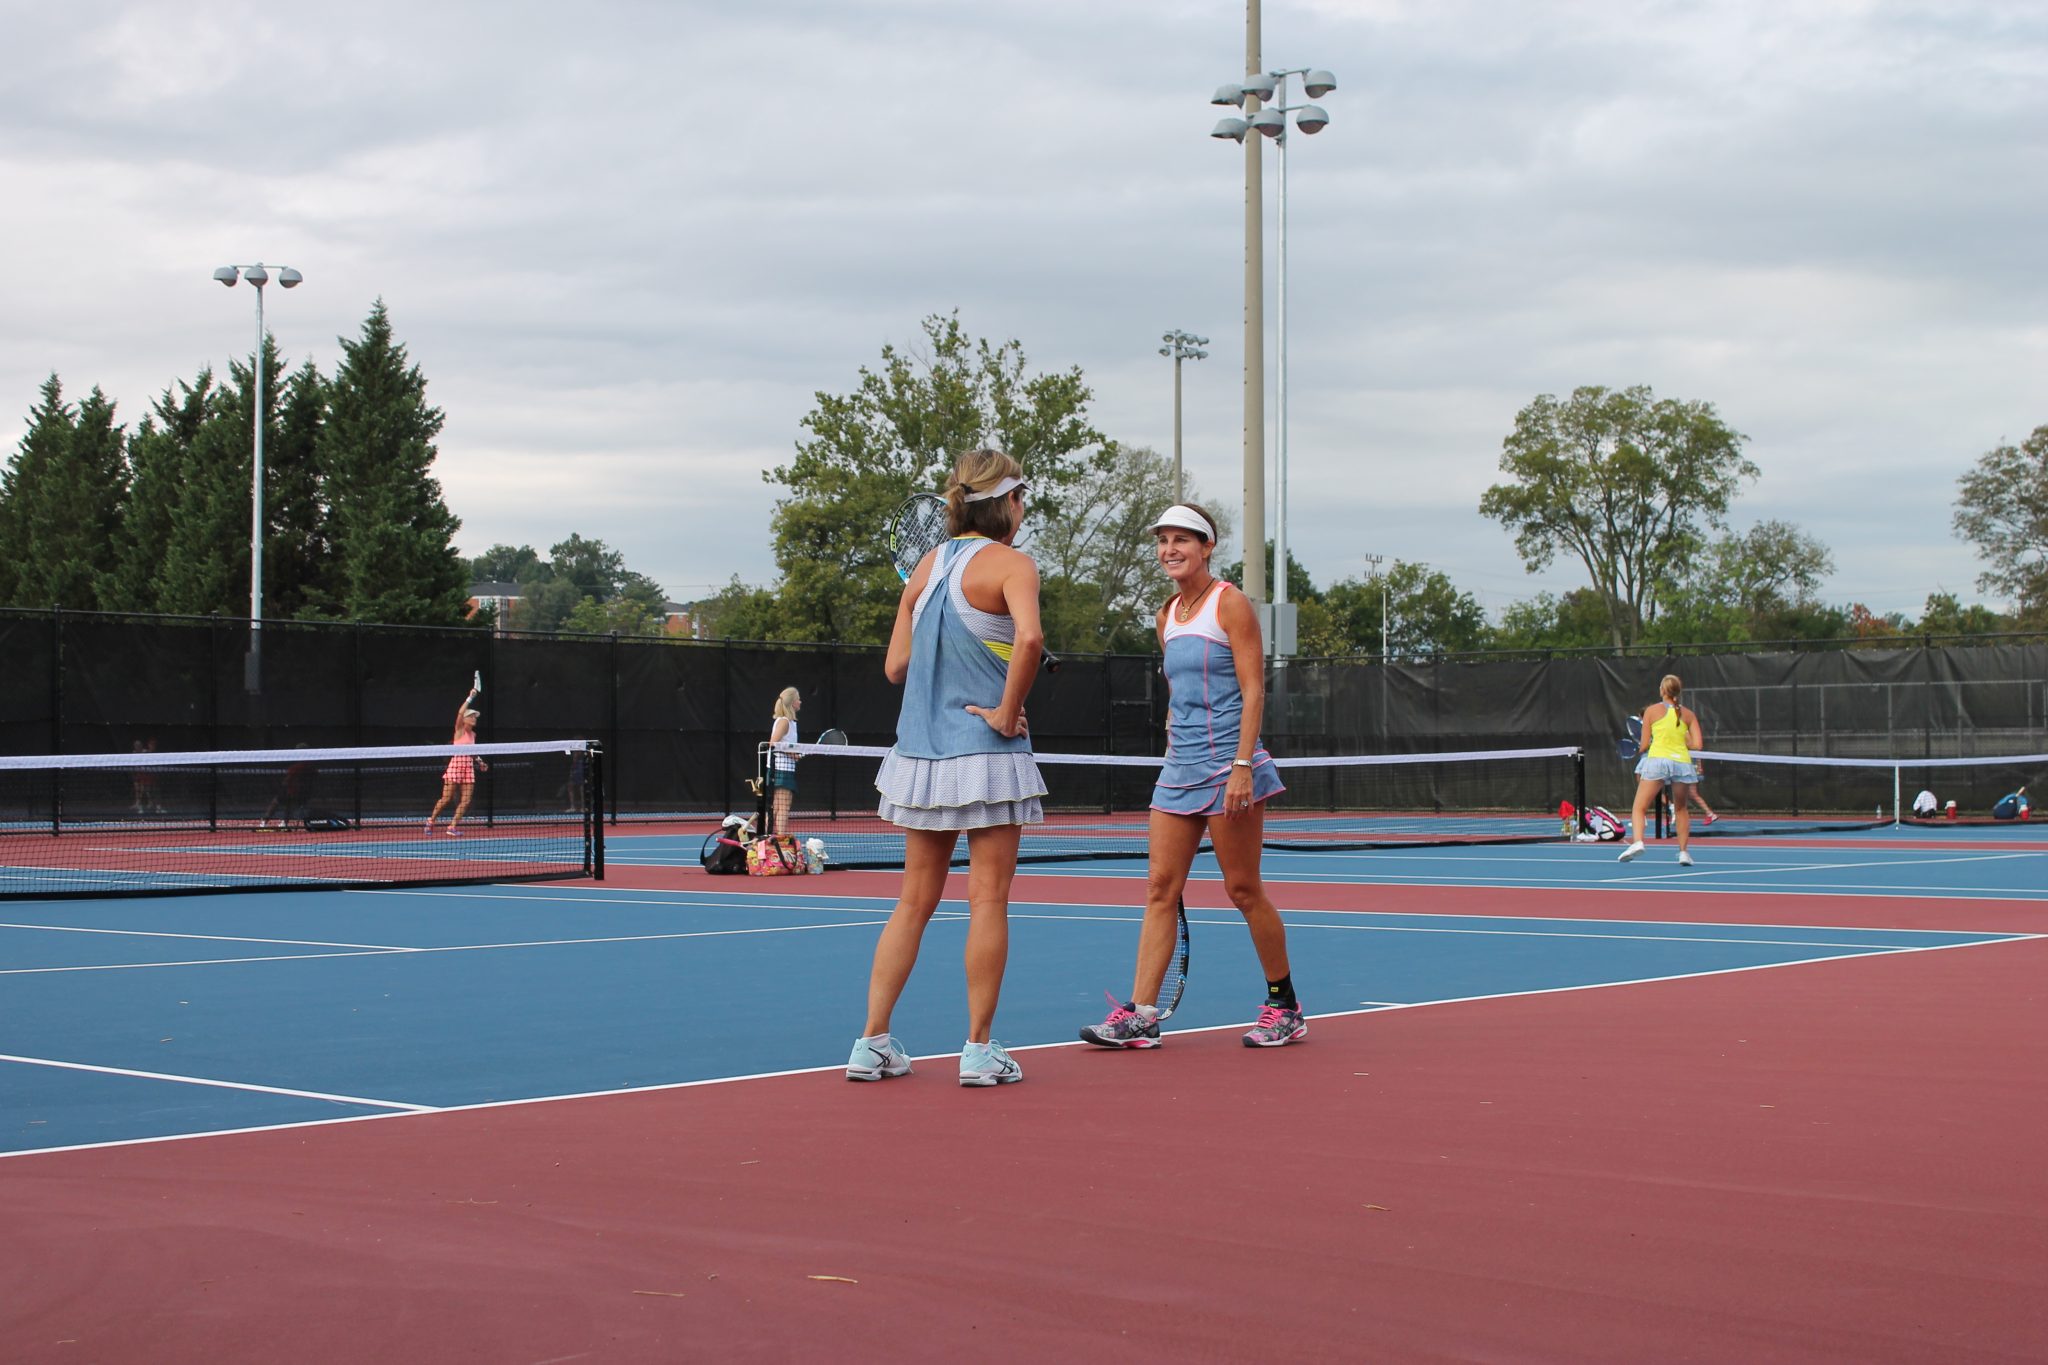 USTA Selects Roanoke to Host Regional Tennis Tournament for First Time